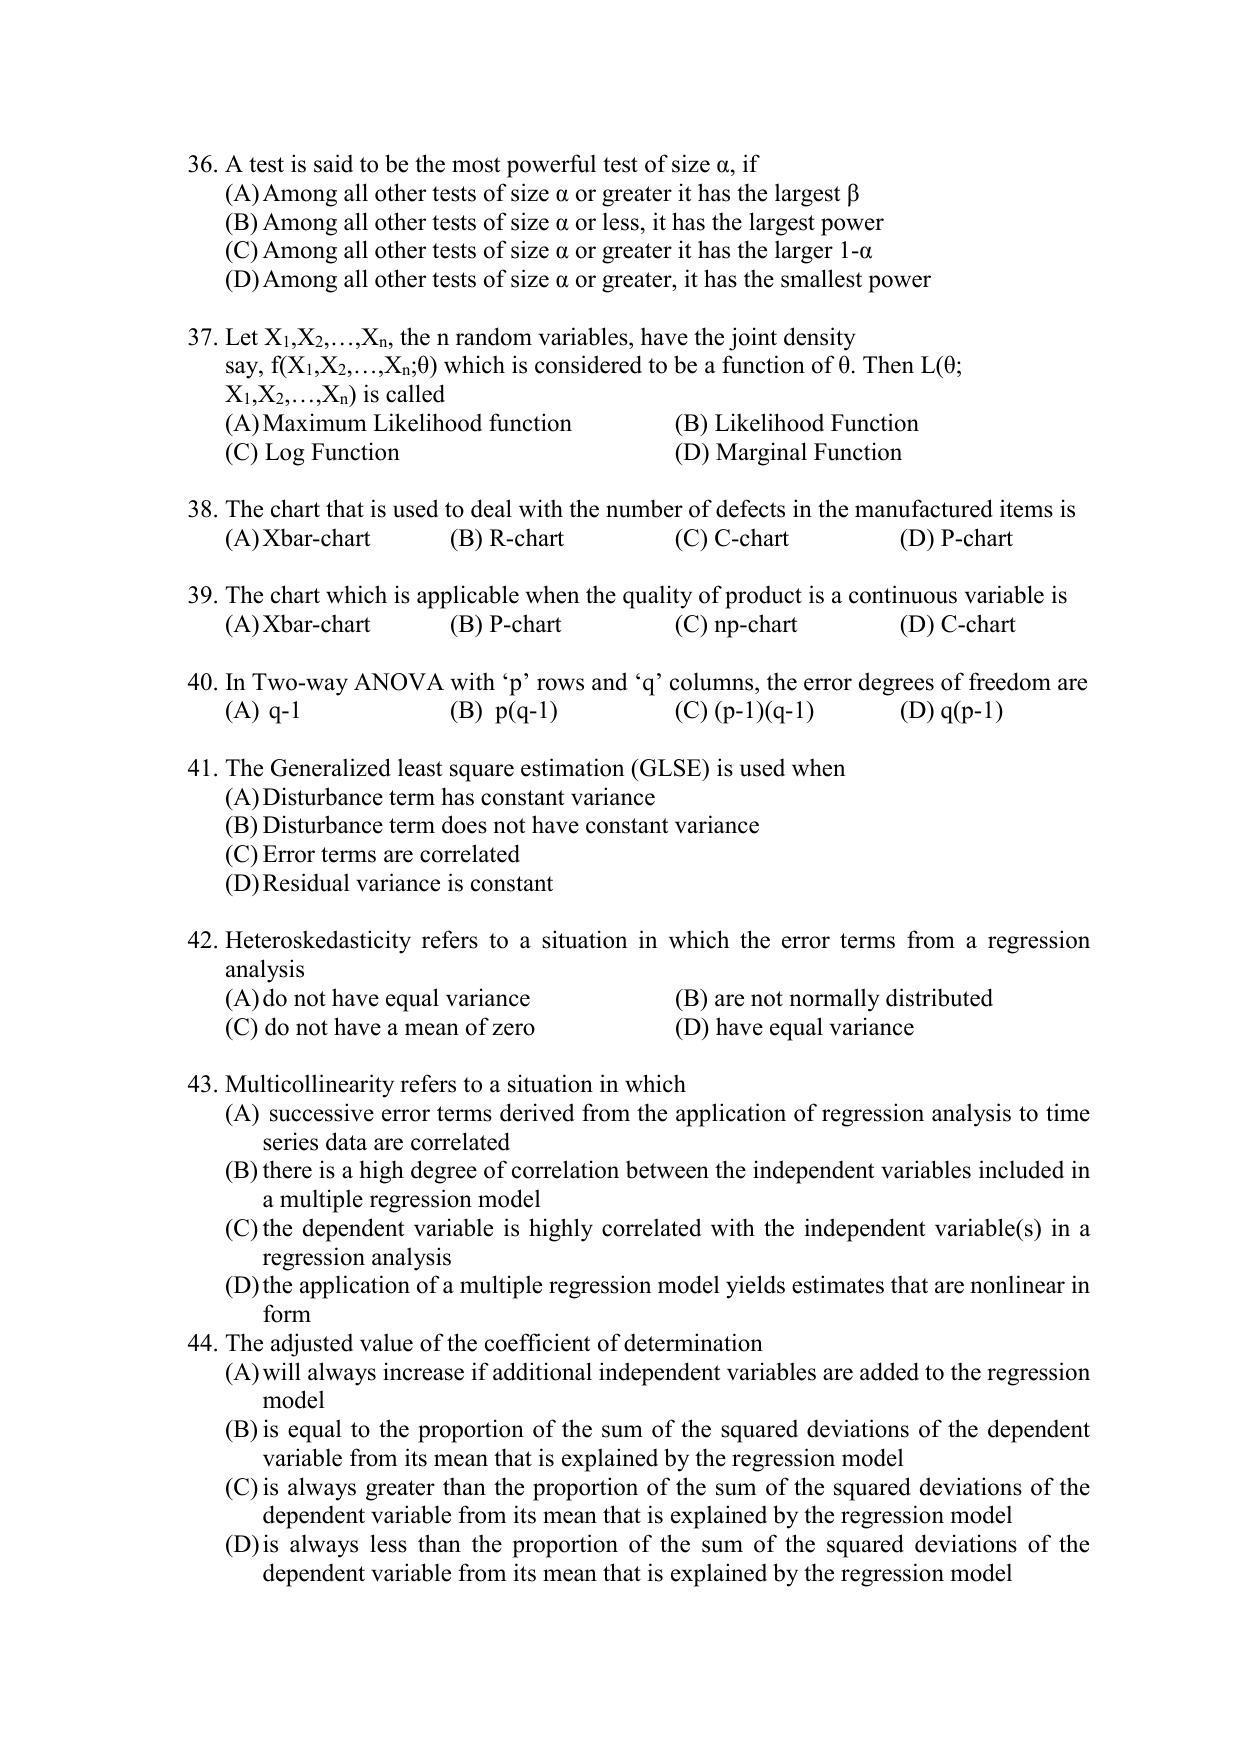 PU MPET Anthropology 2022 Question Papers - Page 64